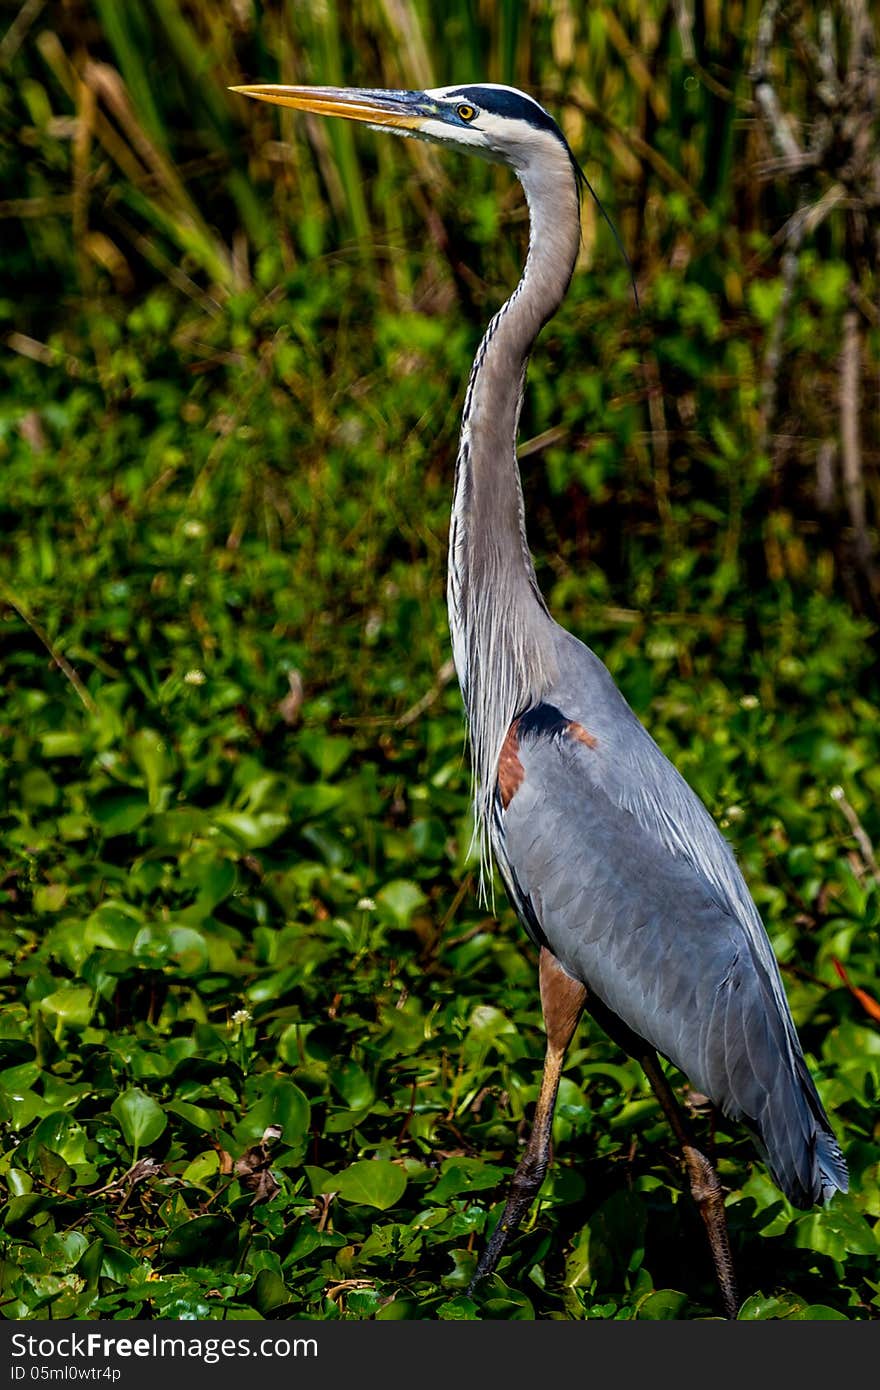 A Great Closeup Shot of a Wild Great Blue Heron (Ardea herodias) at 40 Acre Lake, Stalking a Large Bowfin Fish in the Backwaters of Brazos Bend, Texas. A Great Closeup Shot of a Wild Great Blue Heron (Ardea herodias) at 40 Acre Lake, Stalking a Large Bowfin Fish in the Backwaters of Brazos Bend, Texas.